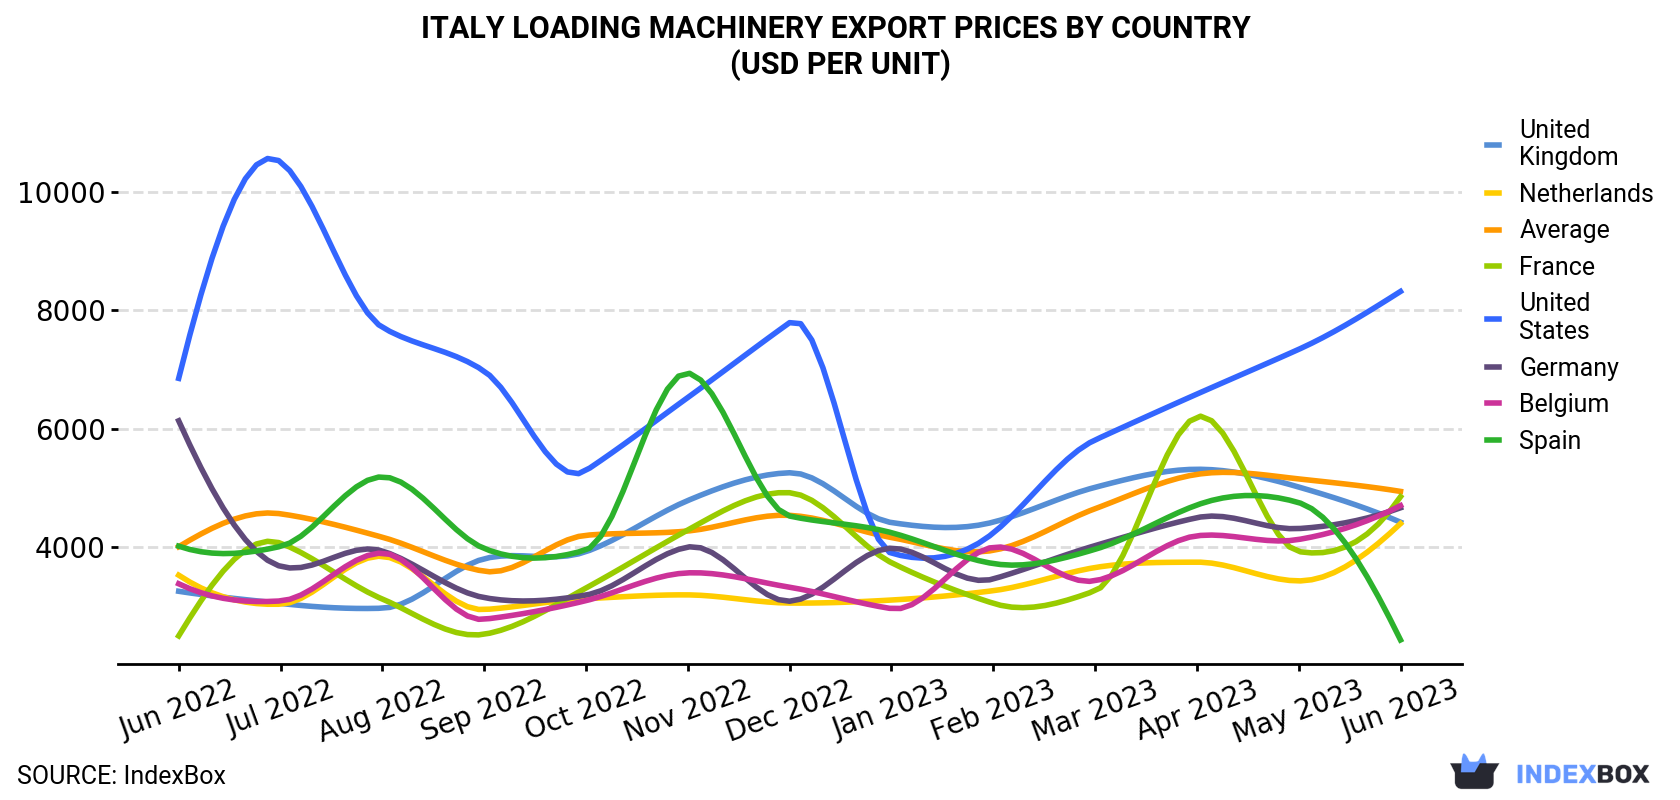 Italy Loading Machinery Export Prices By Country (USD Per Unit)